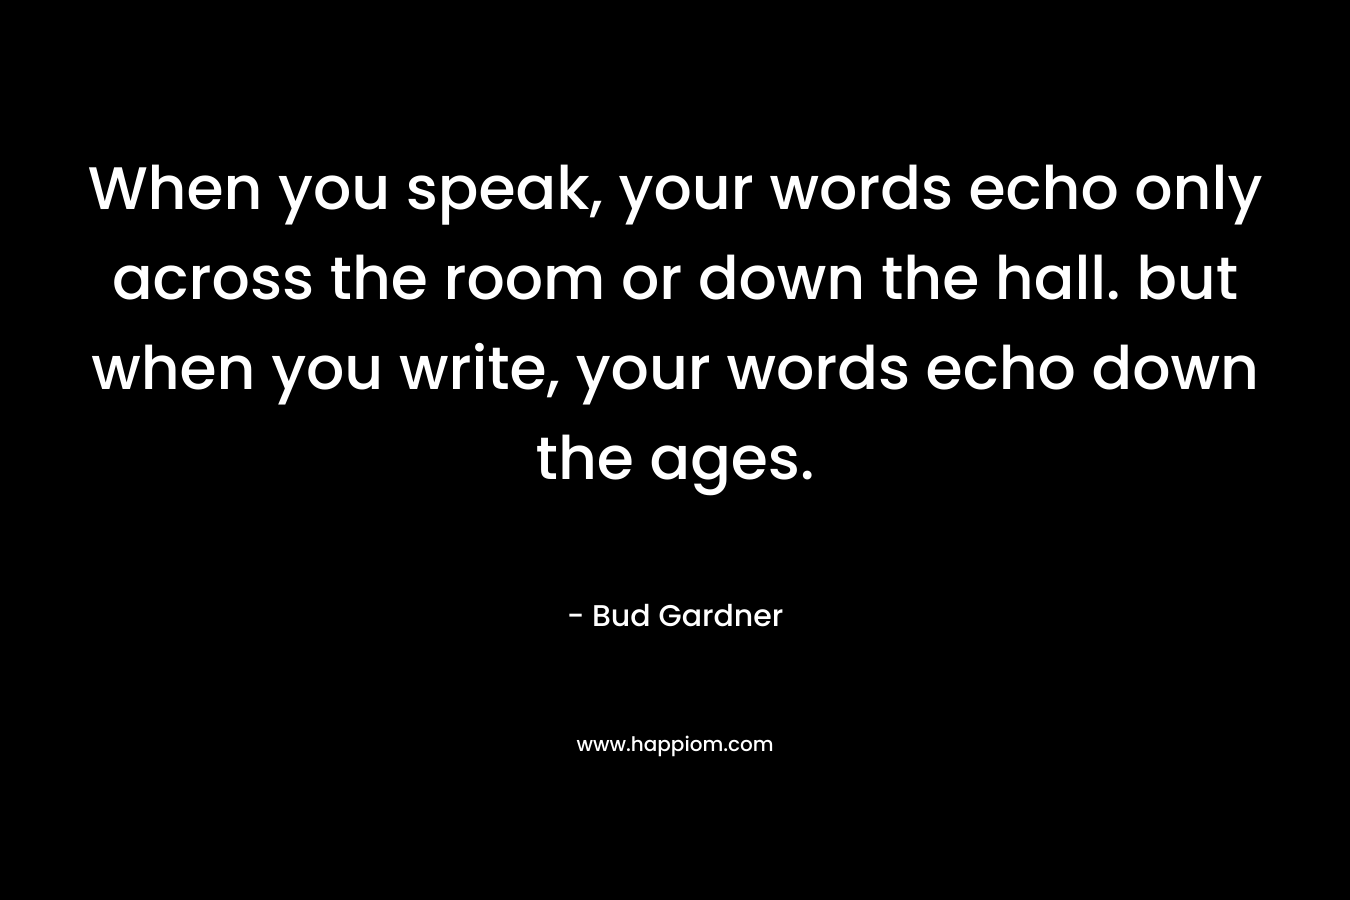 When you speak, your words echo only across the room or down the hall. but when you write, your words echo down the ages.